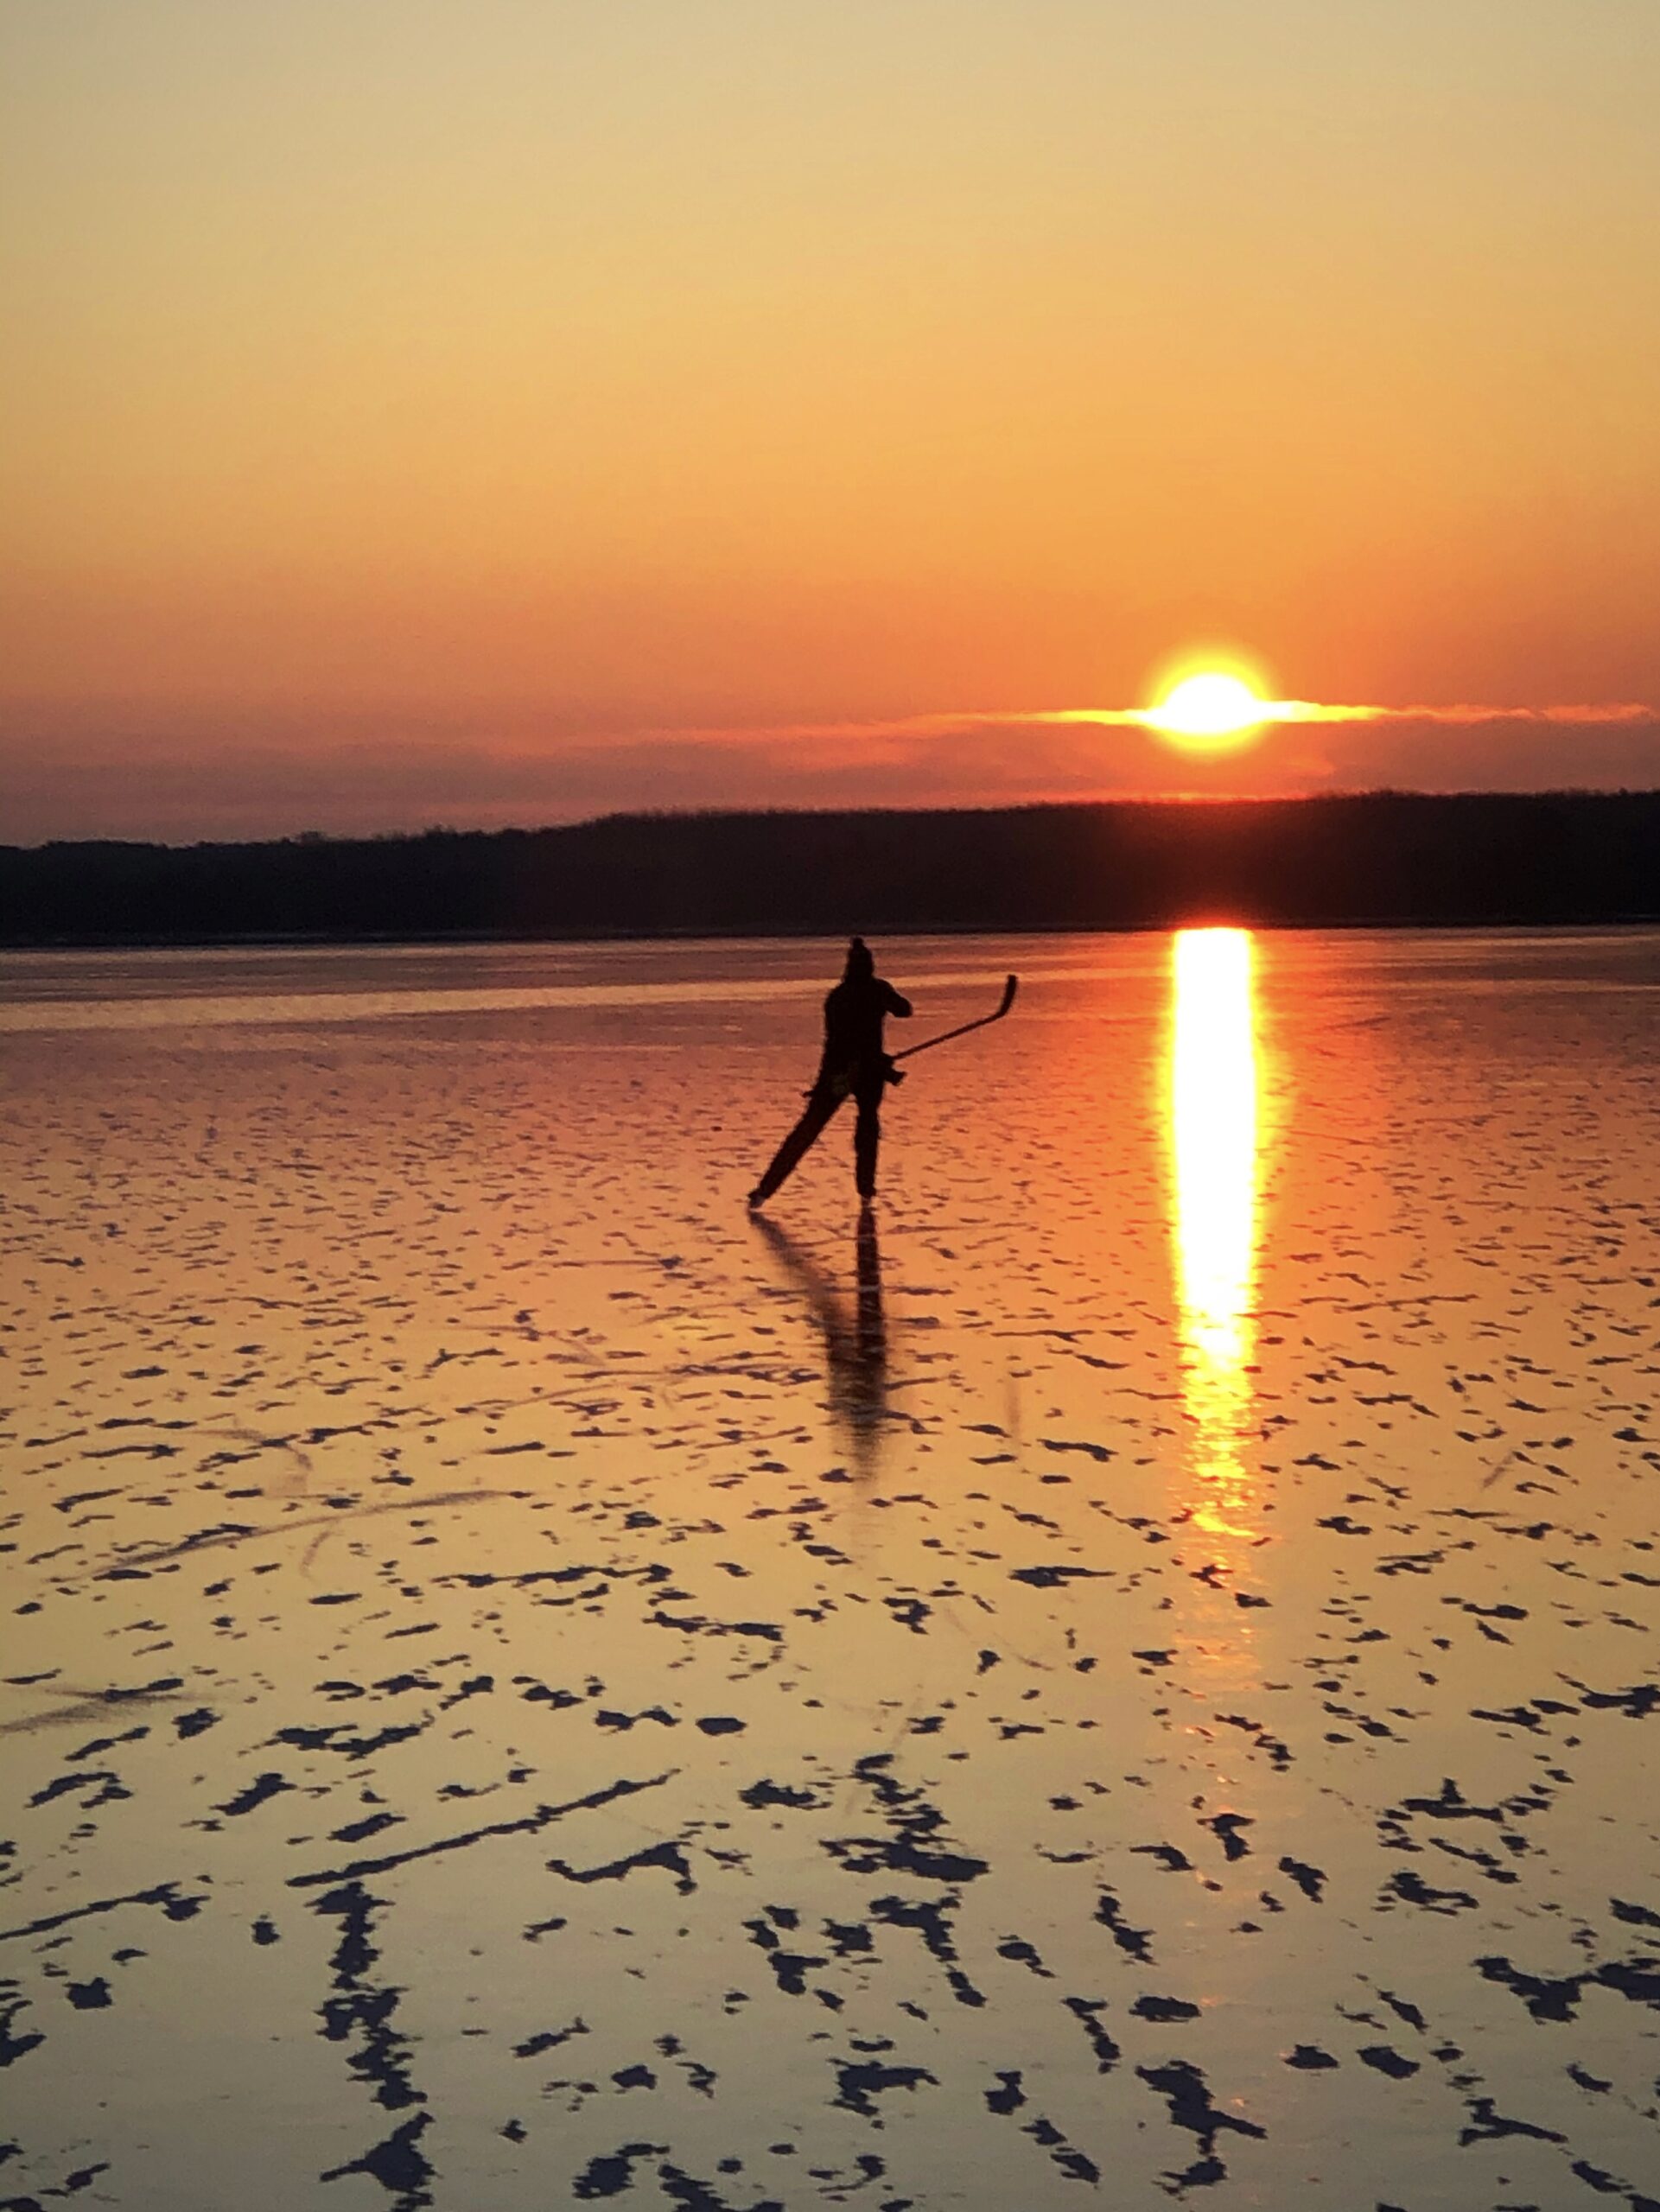 This is a photograph of my friend Mark Morrissey skating at sunrise on a northern Minnesota lake.